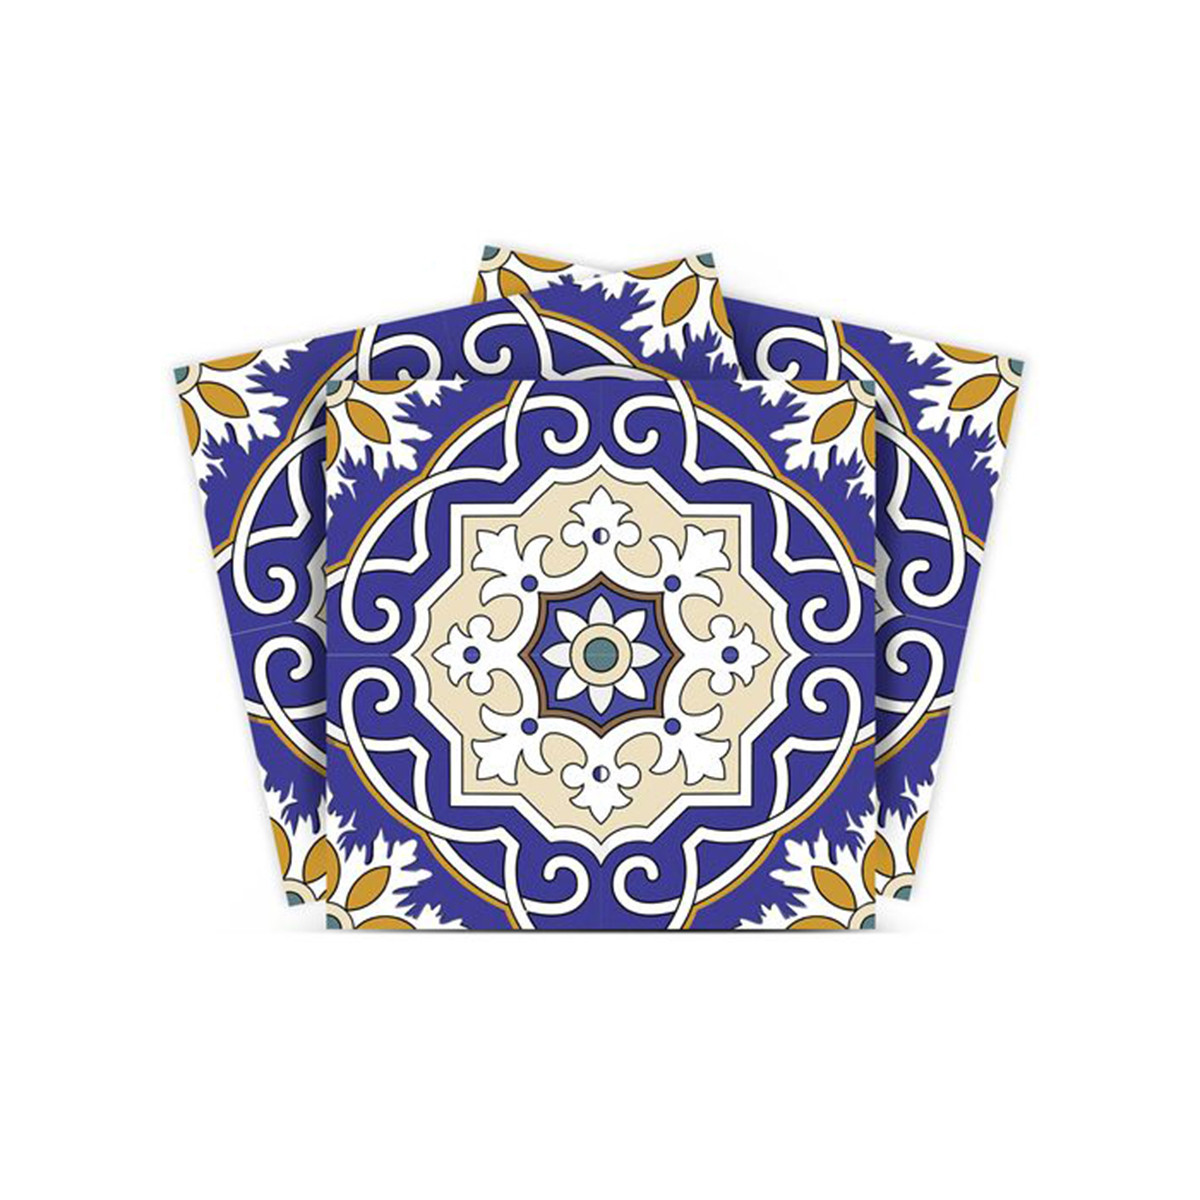 4" X 4" Blue White and Gold Mosaic Removable Tiles-399830-1